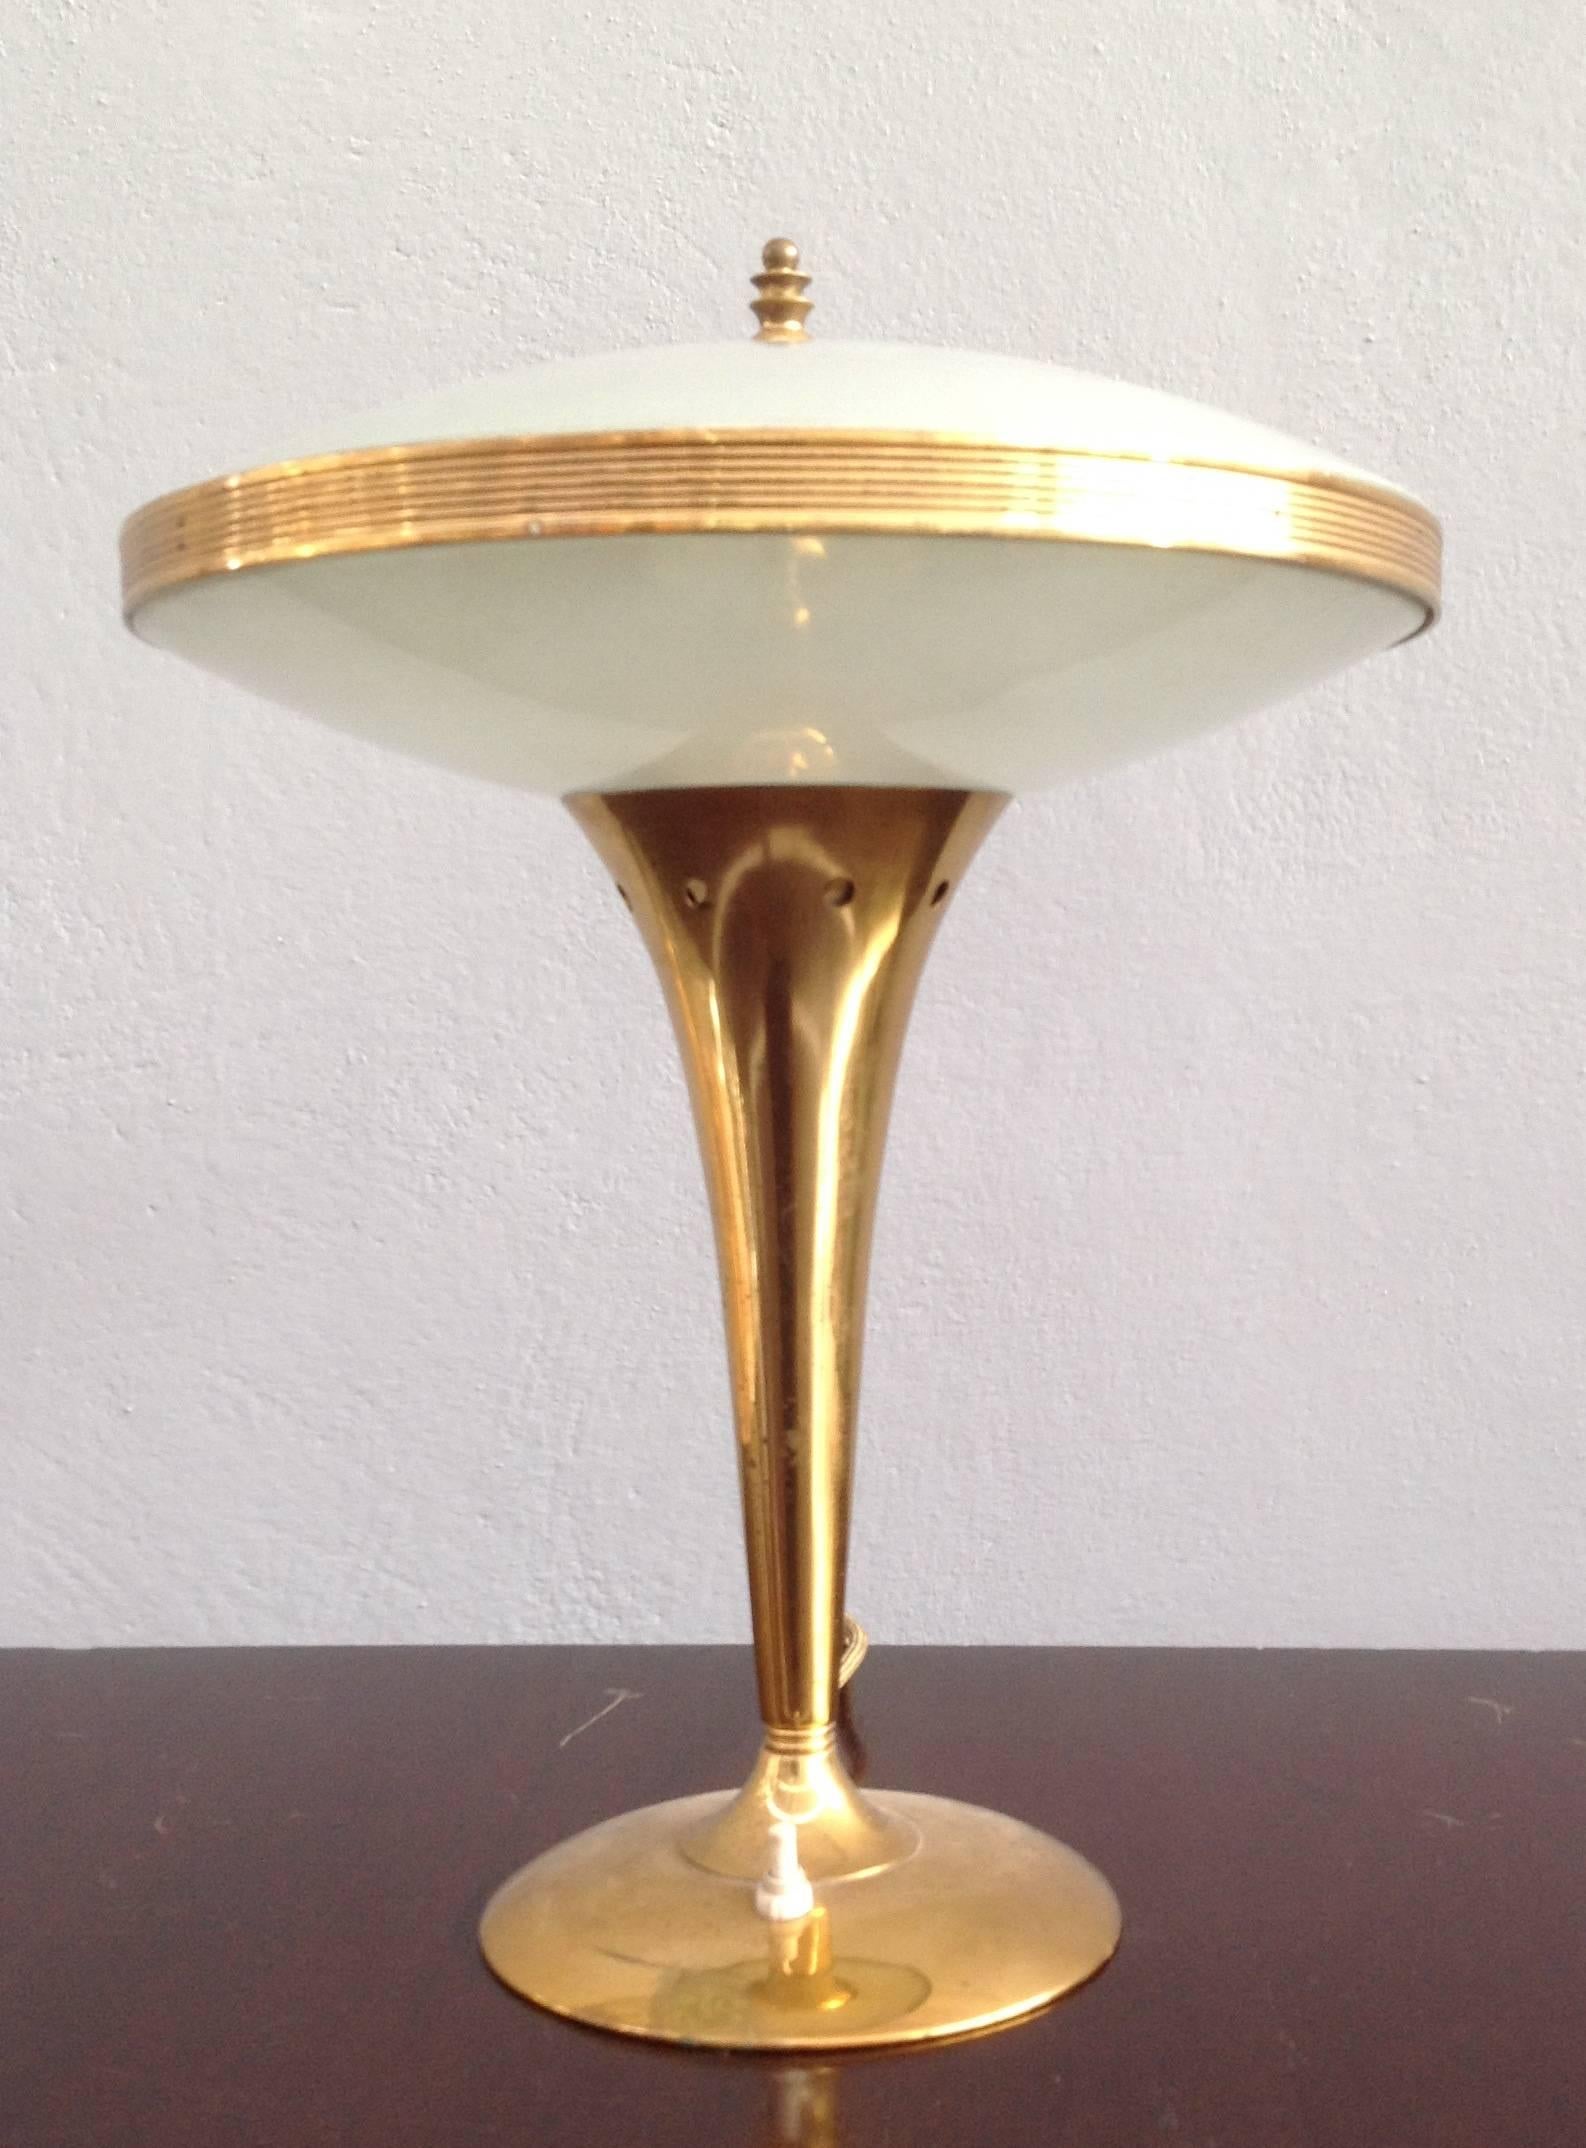 Really nice table lamp attributed to Fontana Arte.
Brass and glass.